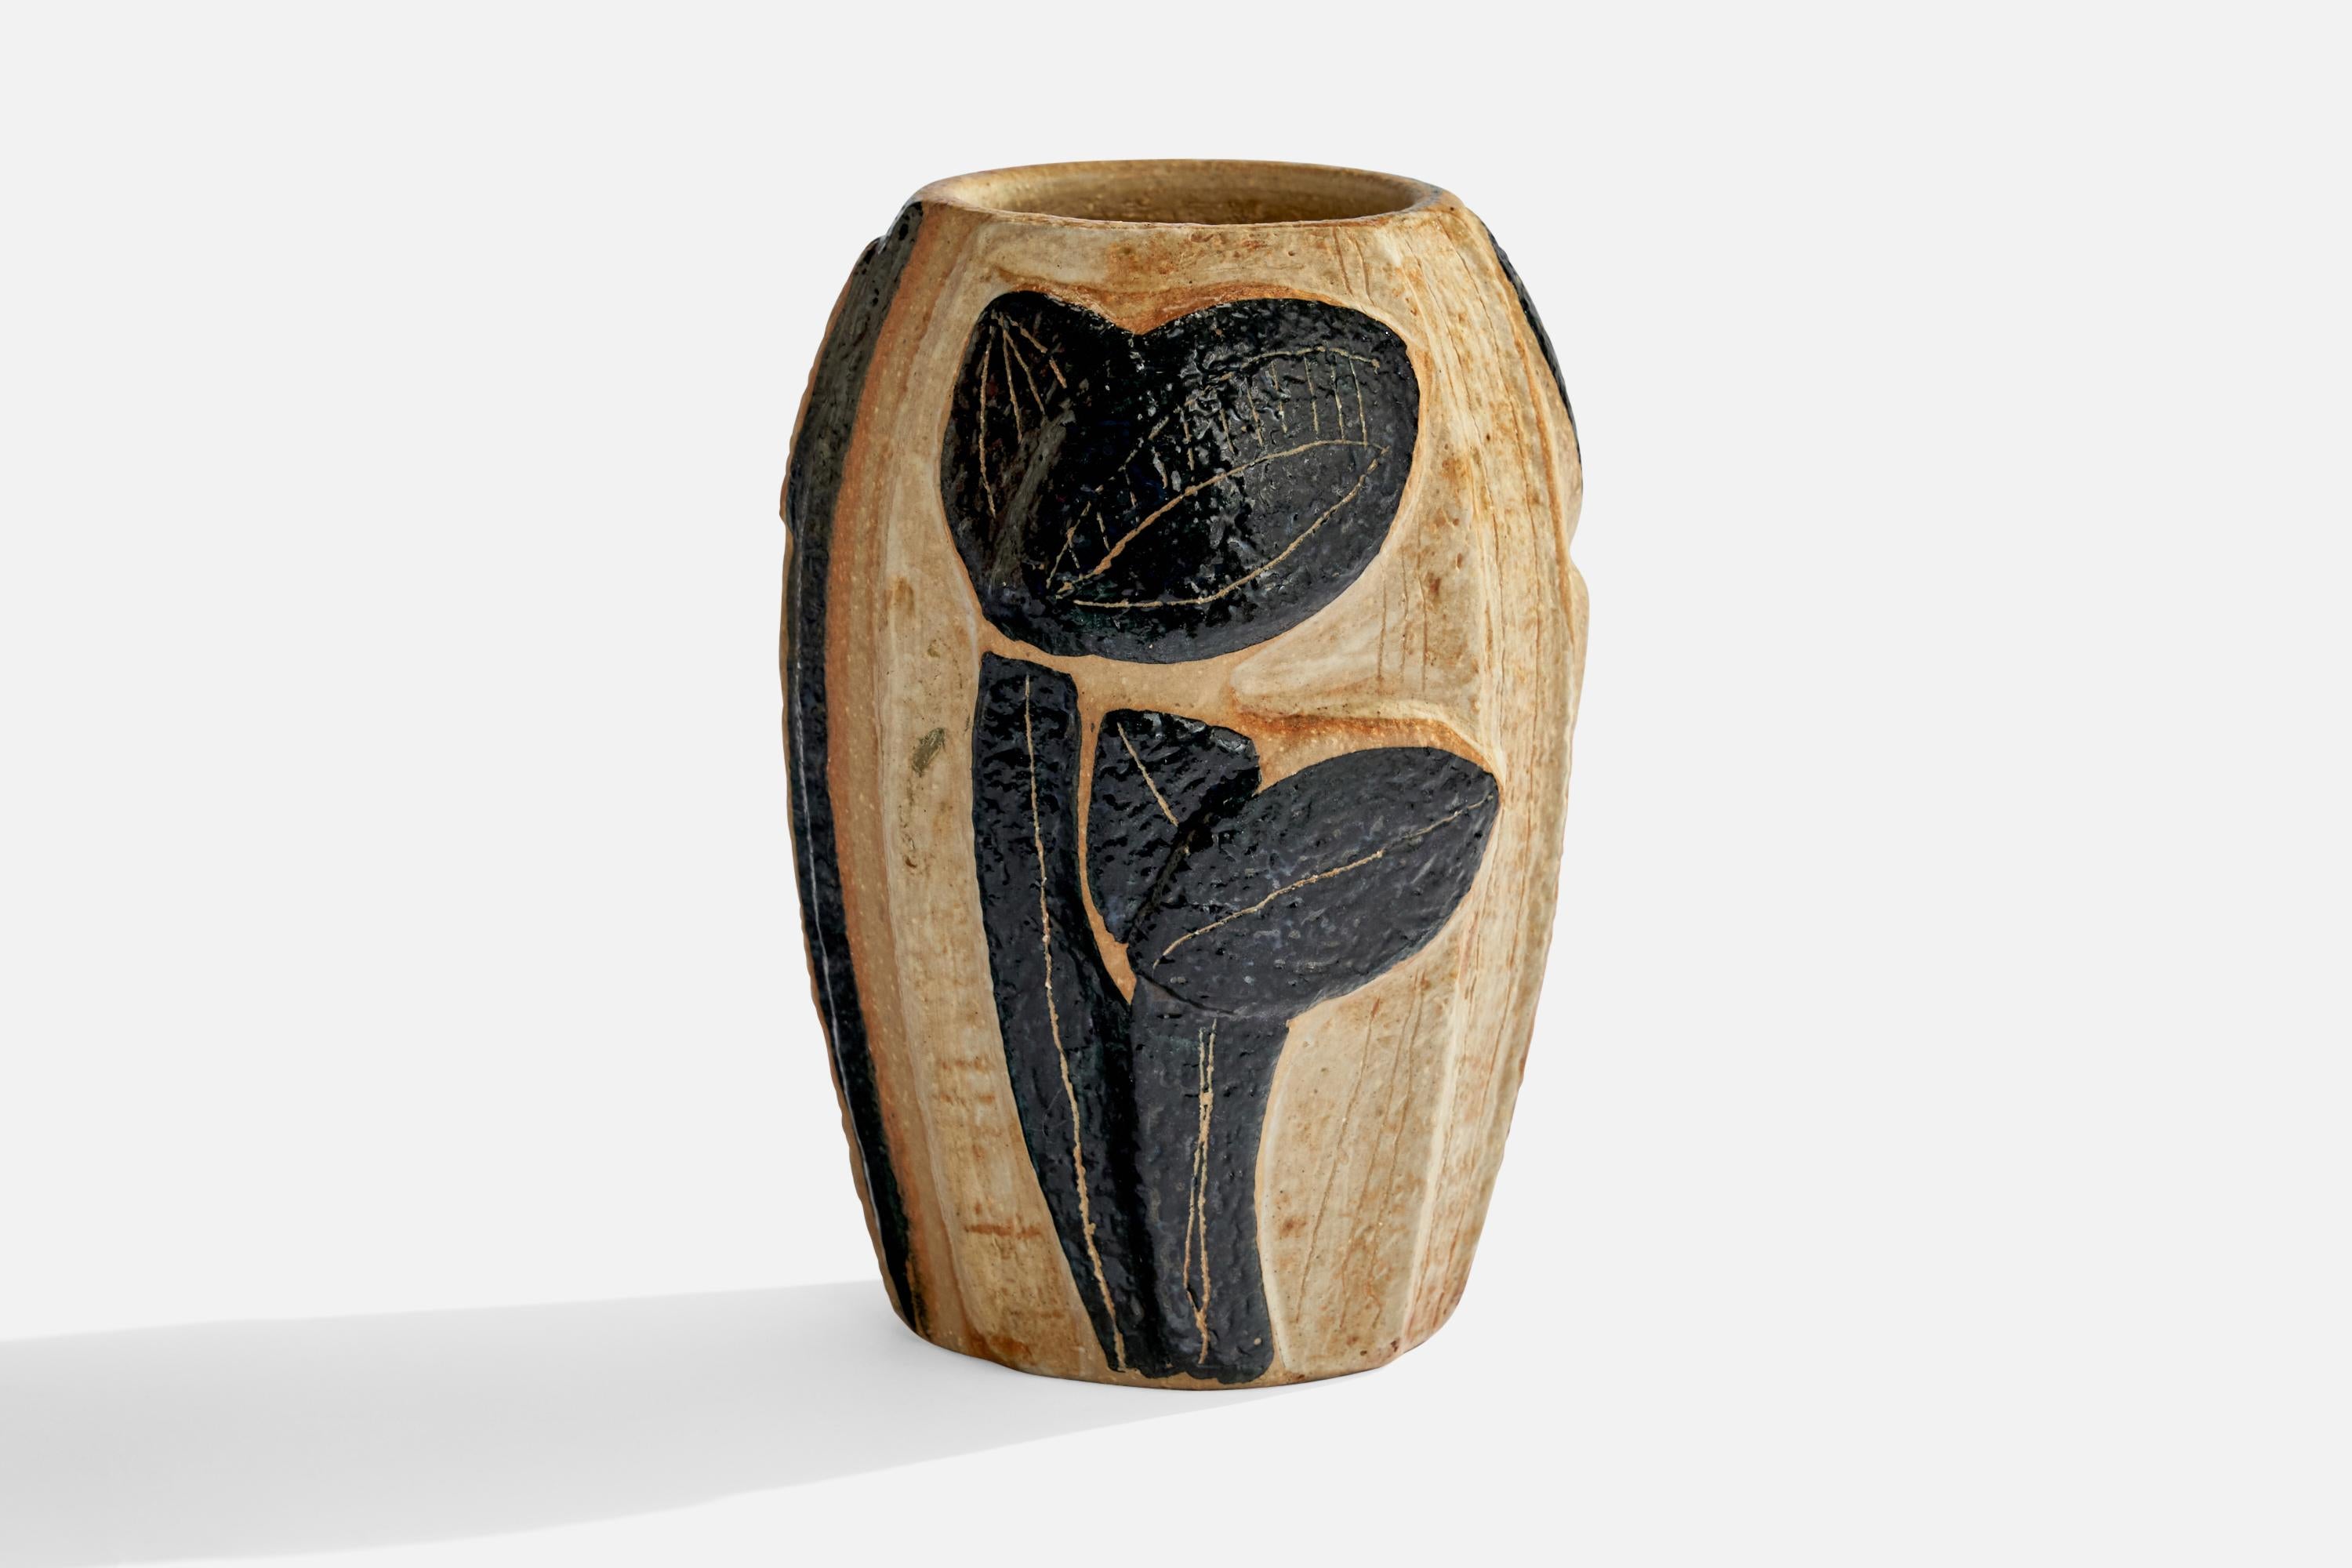 A beige and black-glazed stoneware vase with relief decoration, designed by Noomi Backhausen and produced by Søholm, Bornholm, Denmark, 1960s.